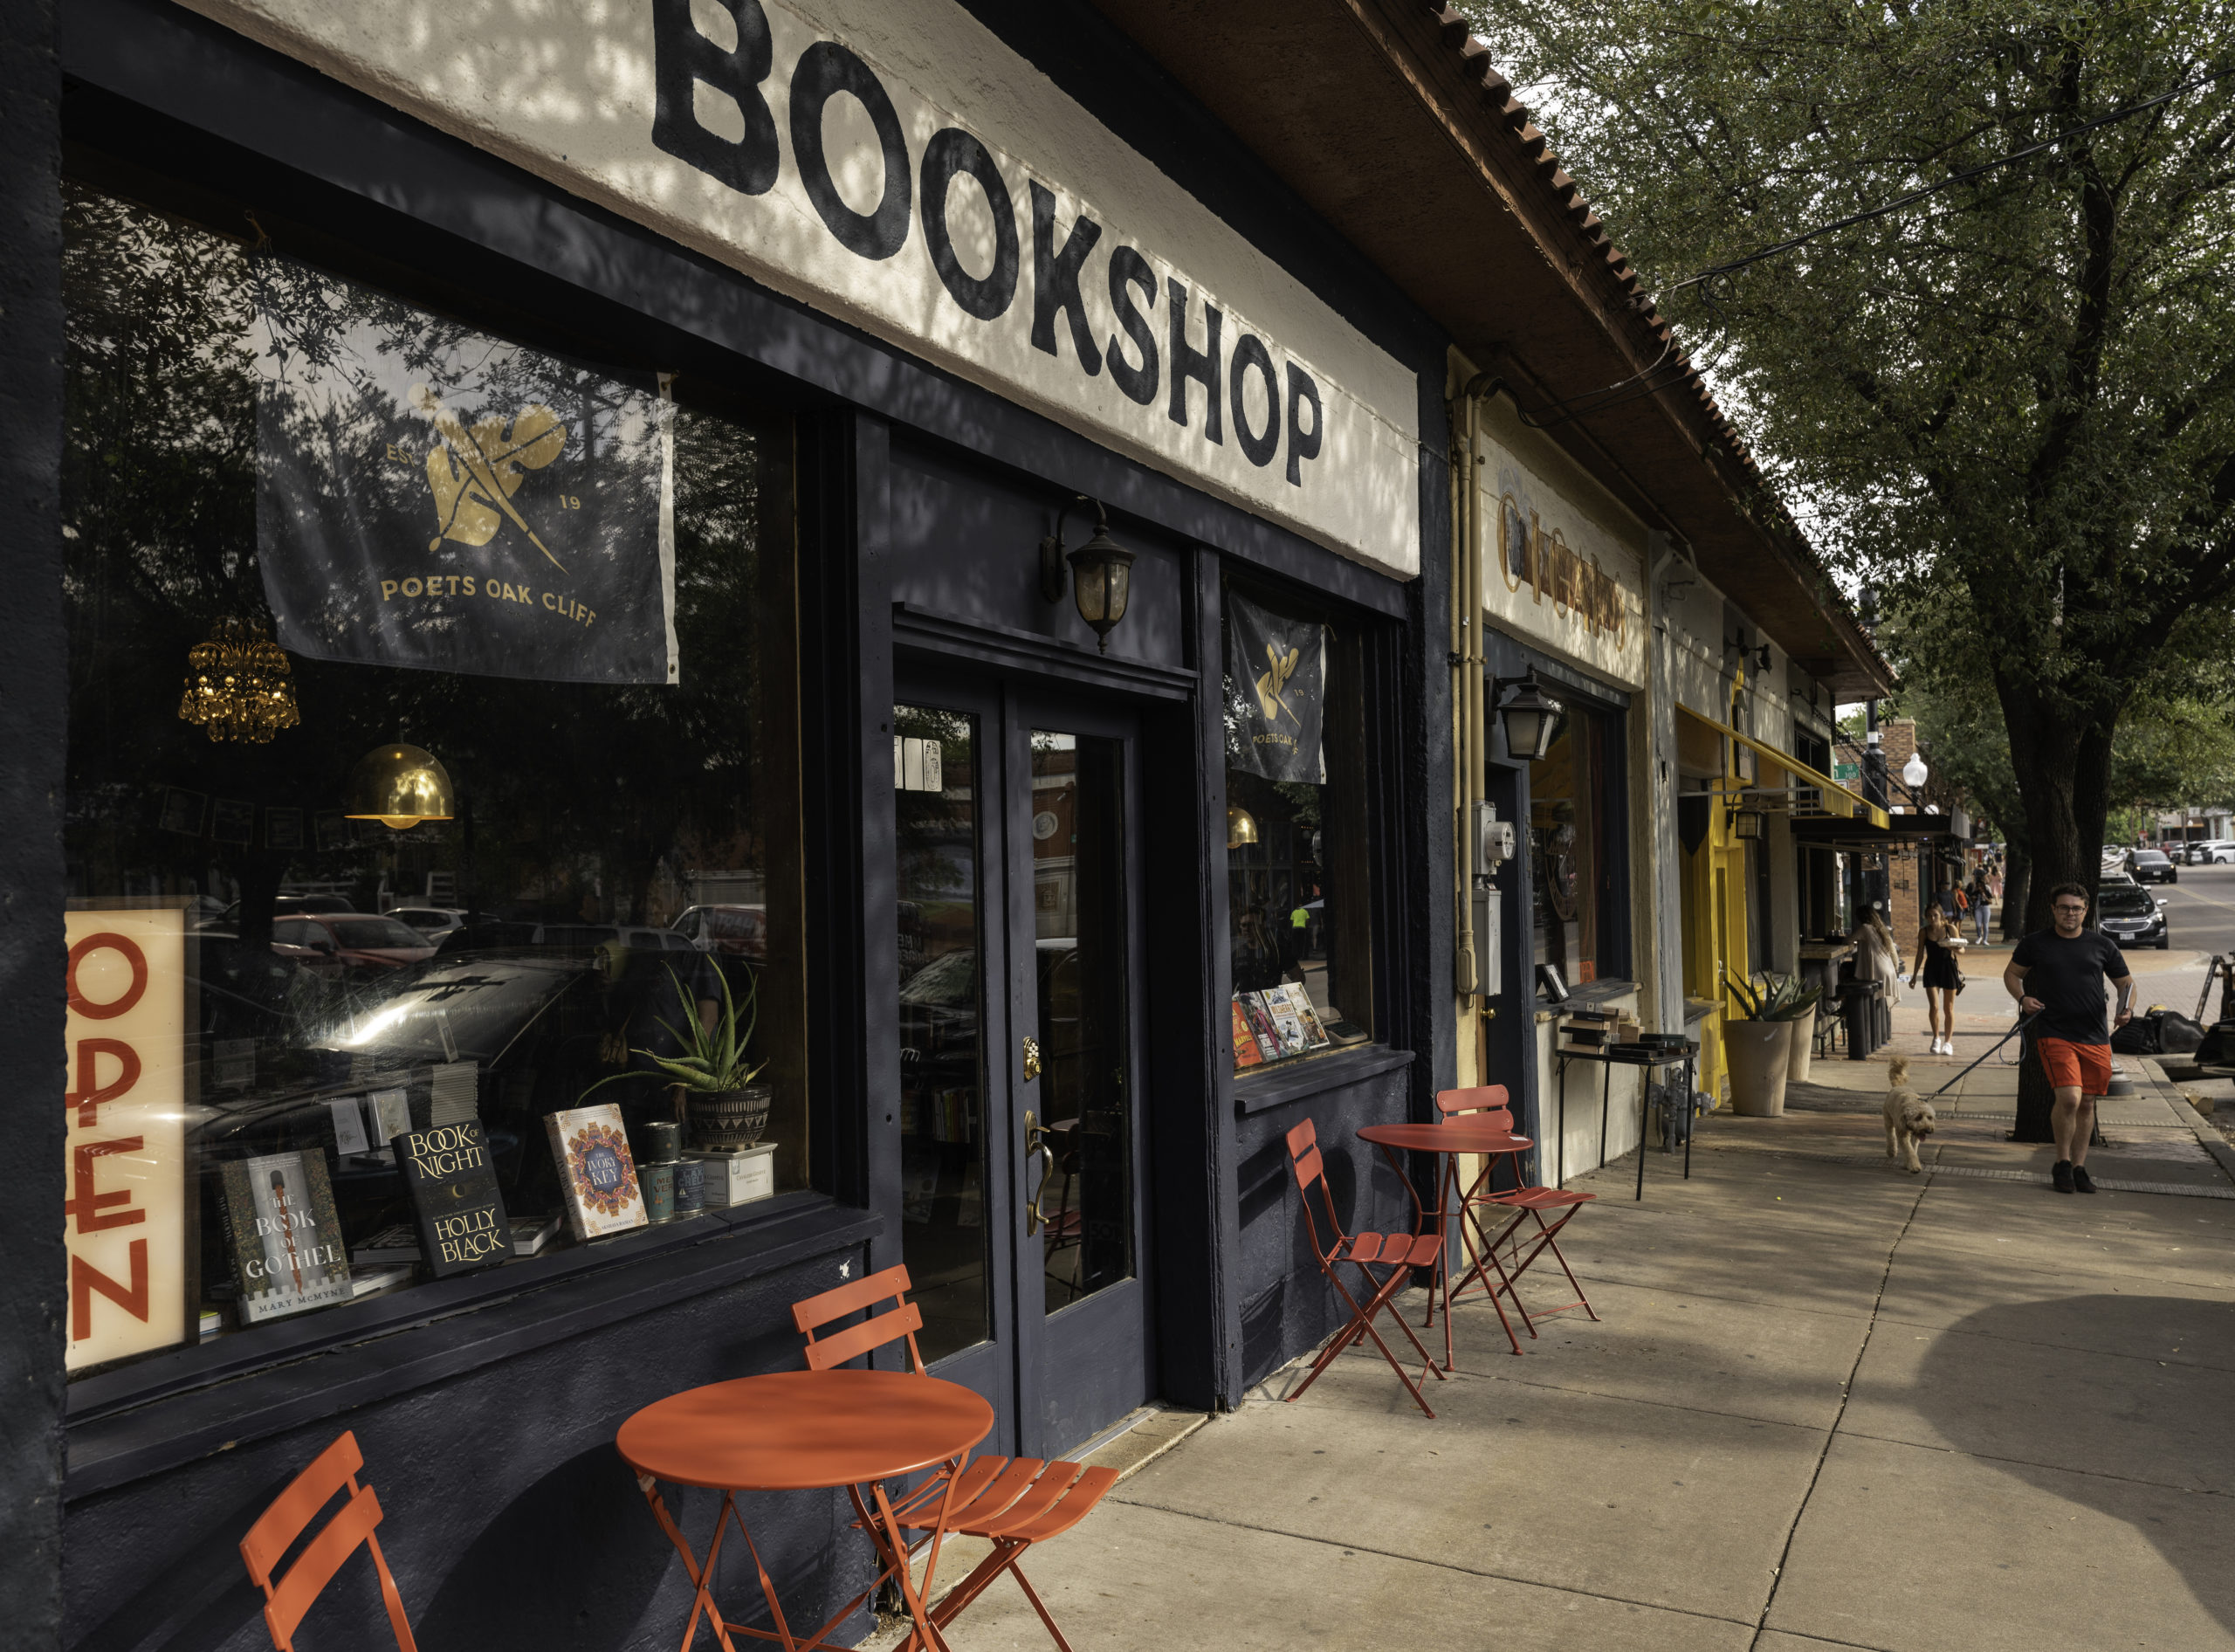 The facade of a shop in a row of shops, with a sign reading "bookshop" in clear block letters. Books and an Open sign are displayed in the window. Texas bookstores, and books about Texas, thrived in 2022.